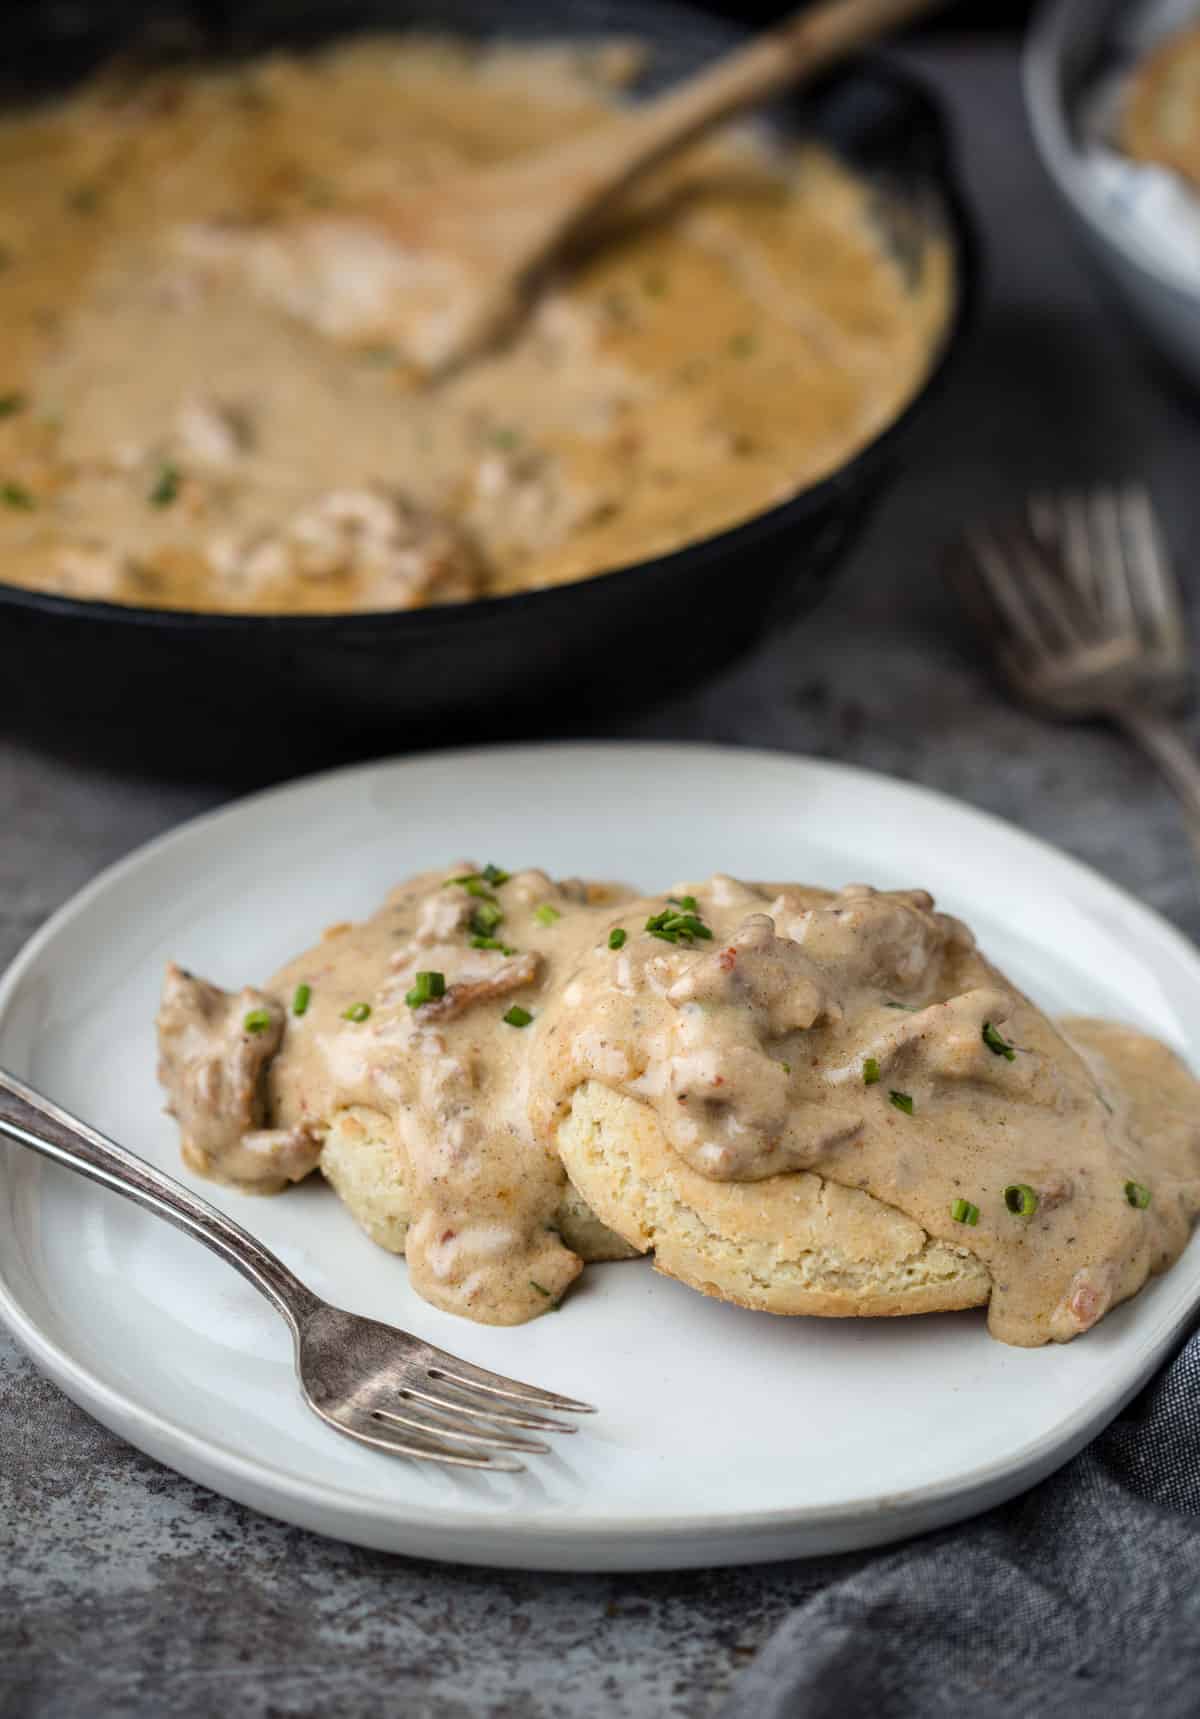 A plate with biscuits and Smoked Sausage Gravy